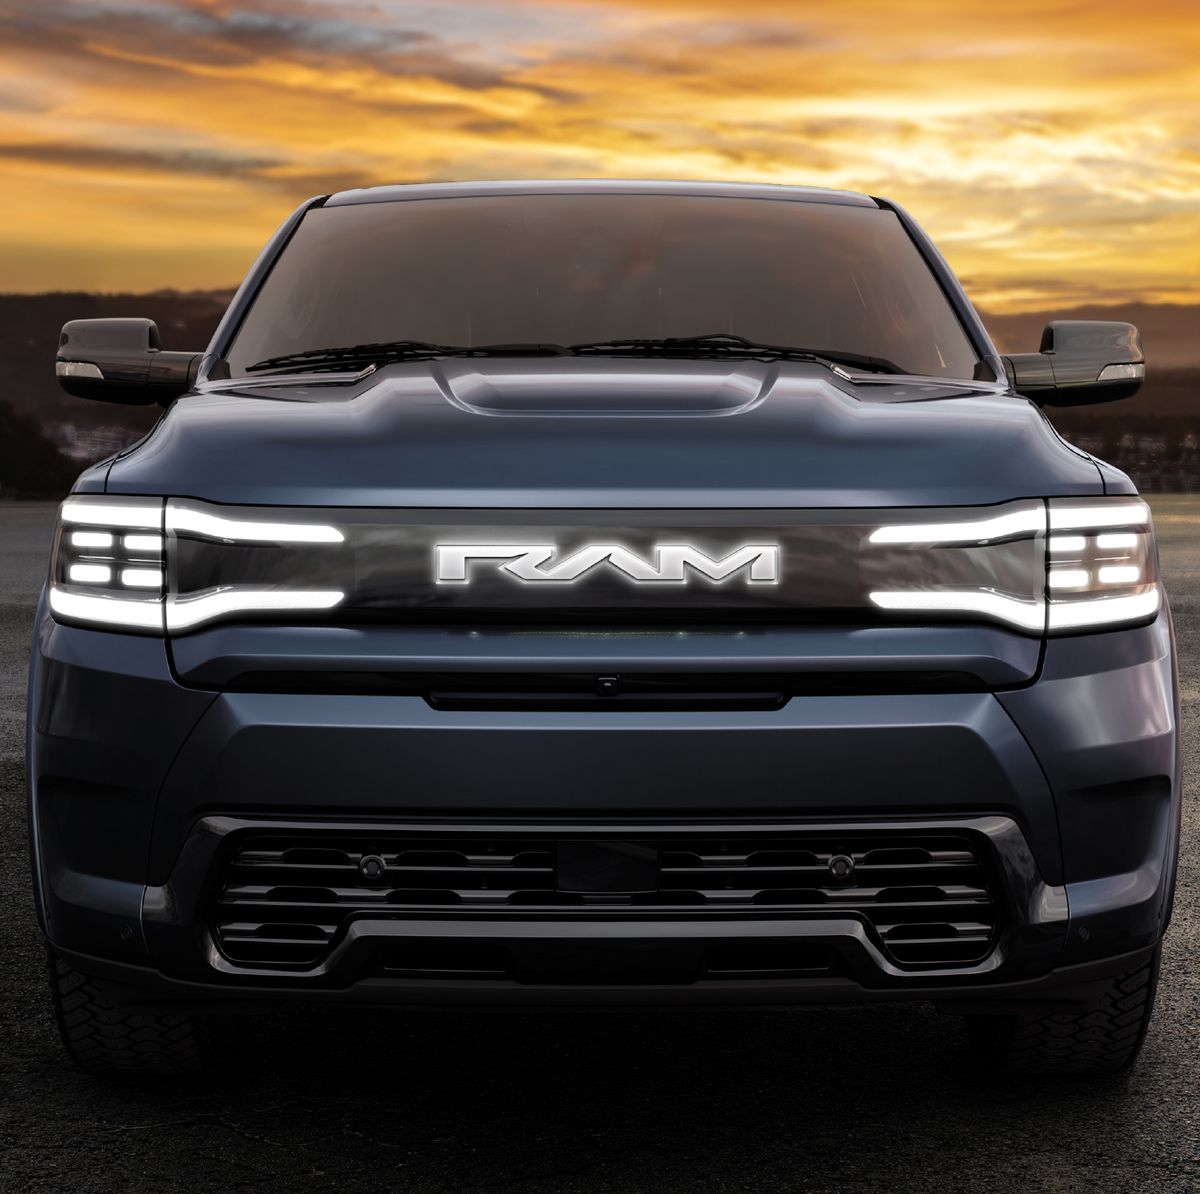 The 2025 Ram 1500 You Need to Know